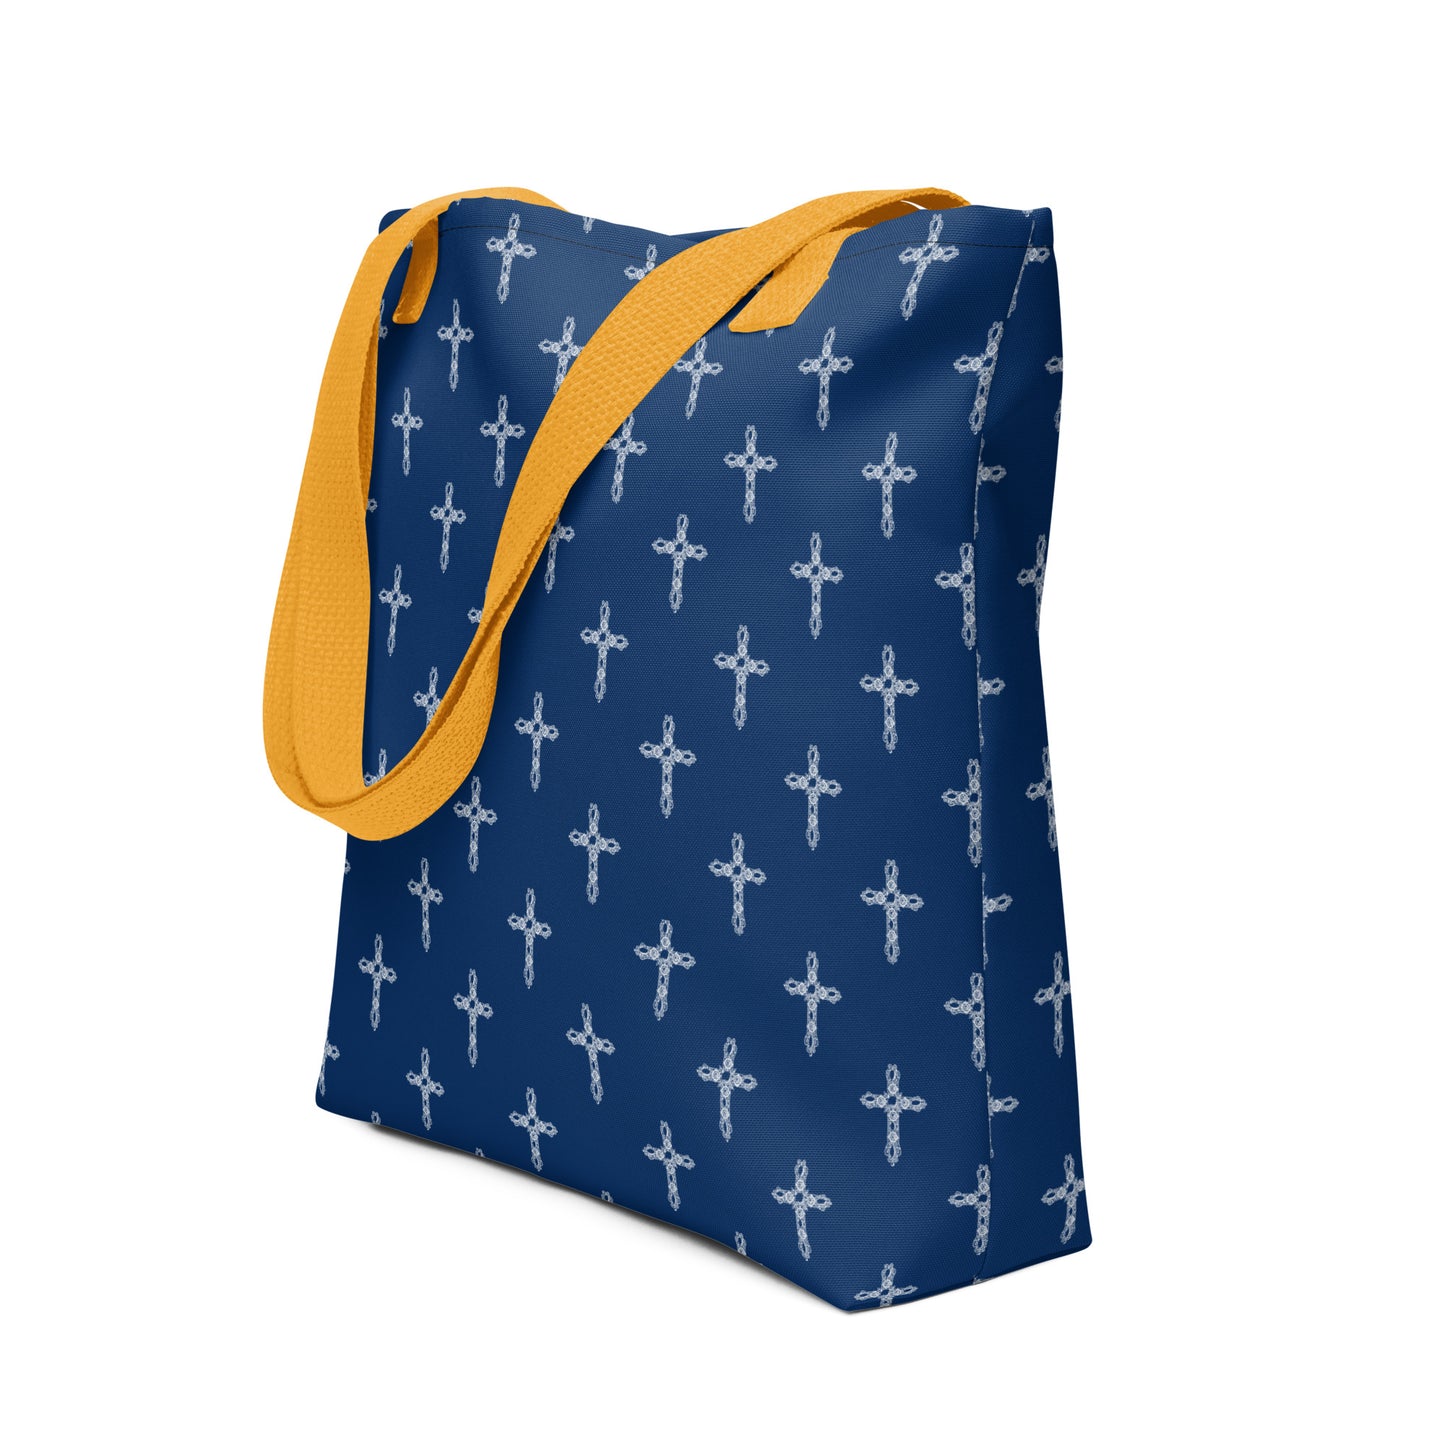 Navy blue tote bag or purse with white crosses on it and bright yellow handles flopped over onto one side of the bag.